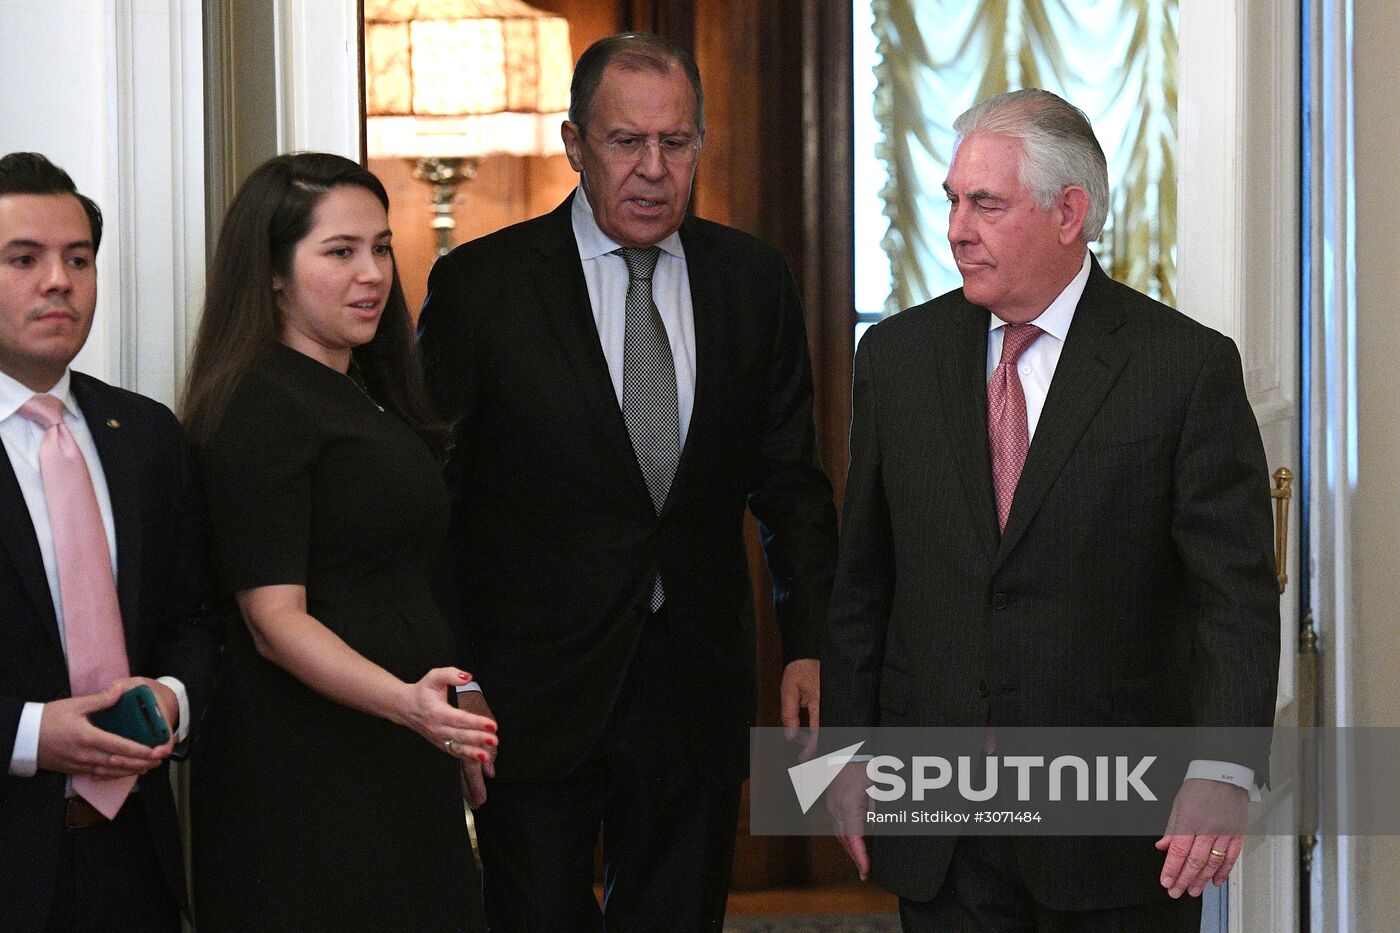 Talks between Foreign Minister Sergei Lavrov and US Secretary of State Rex W. Tillerson